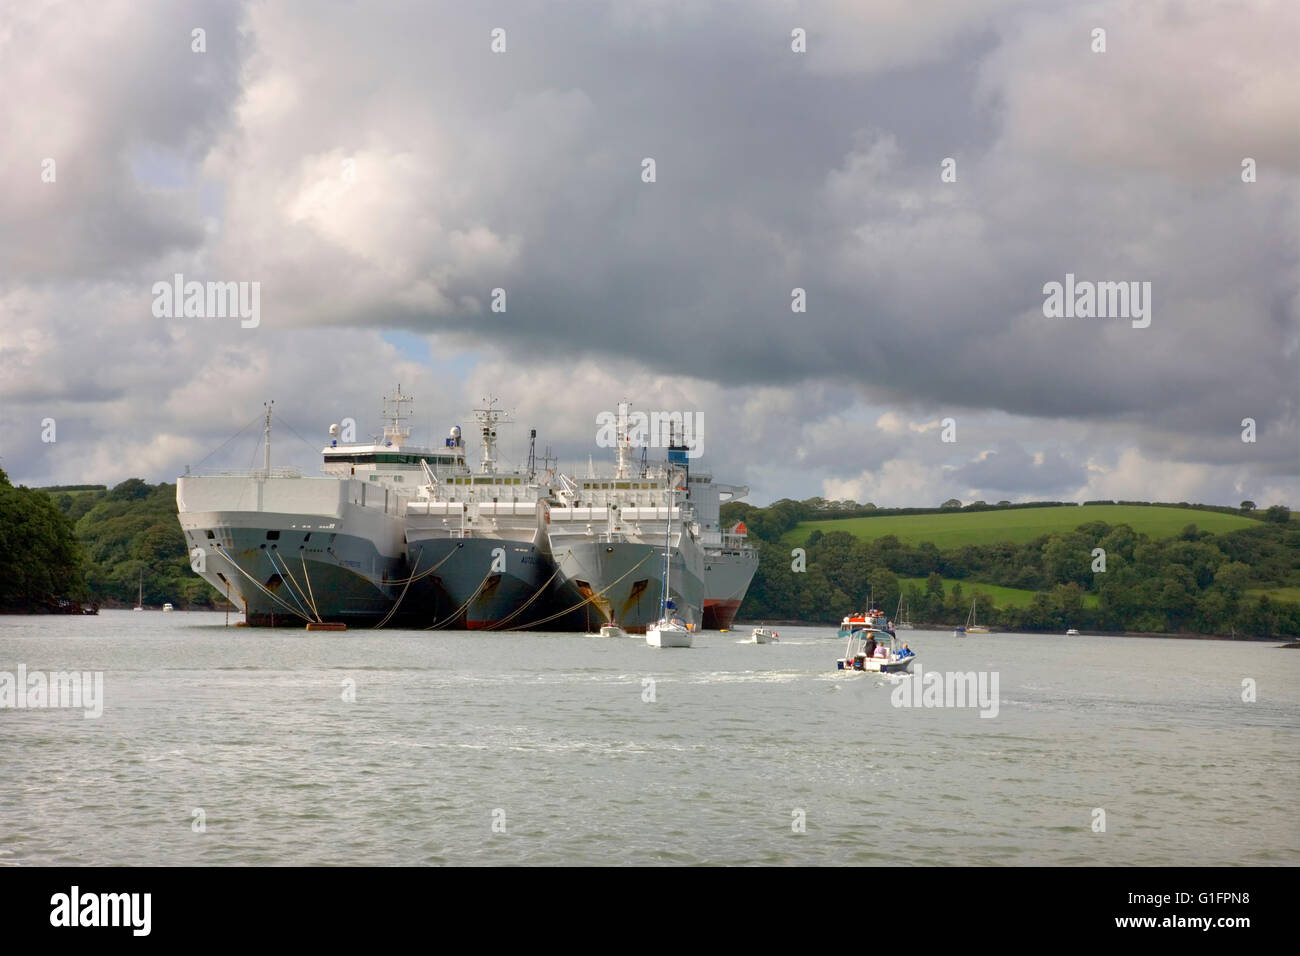 River Fal above King Harry Ferry, Cornwall, England, with several huge car transporter ships laid up on moorings in the river Stock Photo